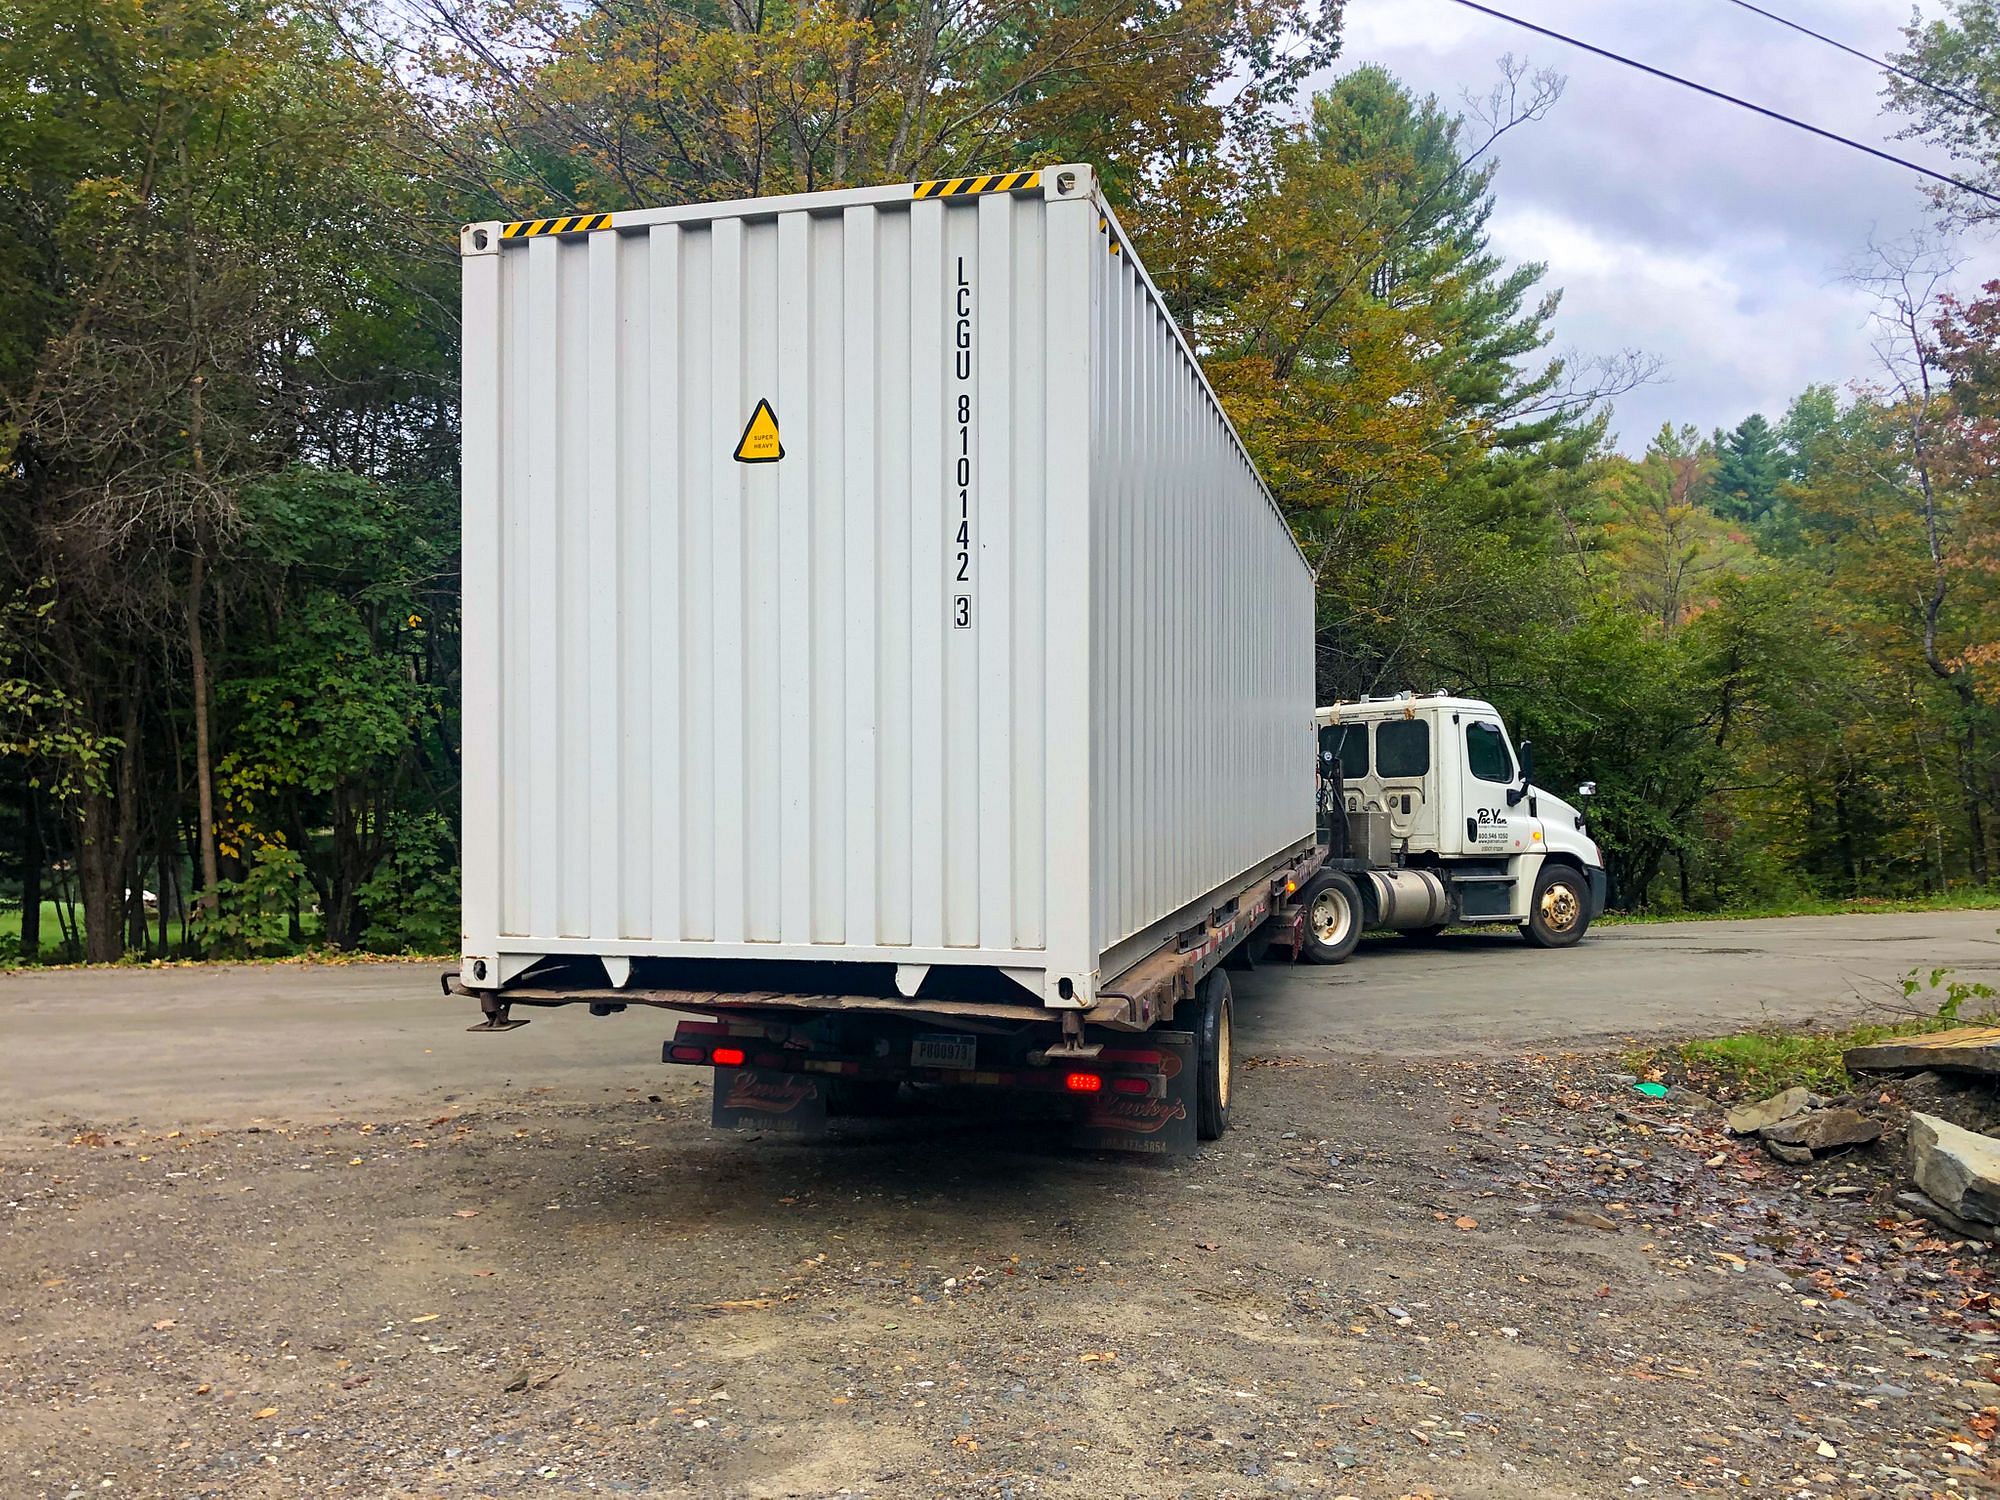 Shipping Container Delivery